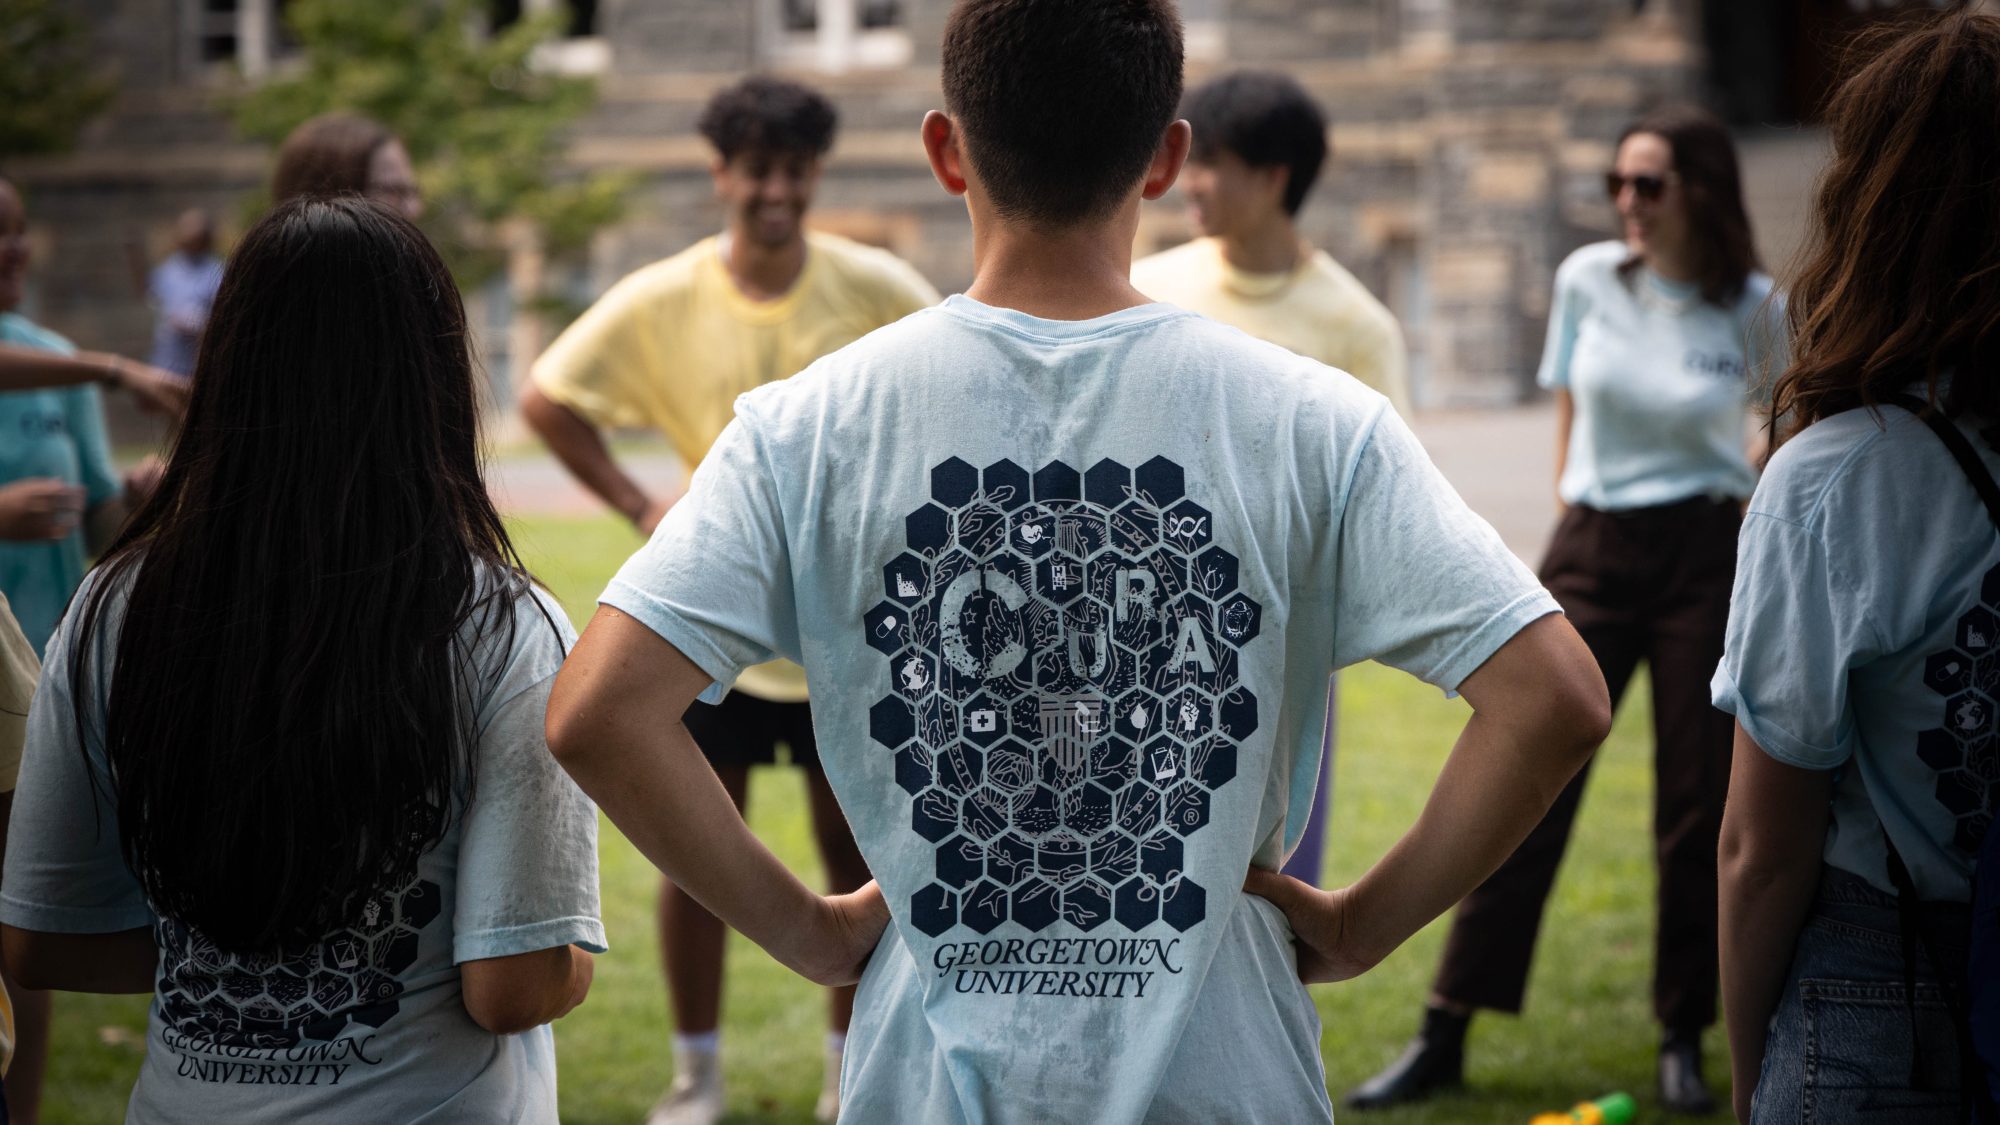 Students in a circle with one student wearing a blue shirt from CURA program